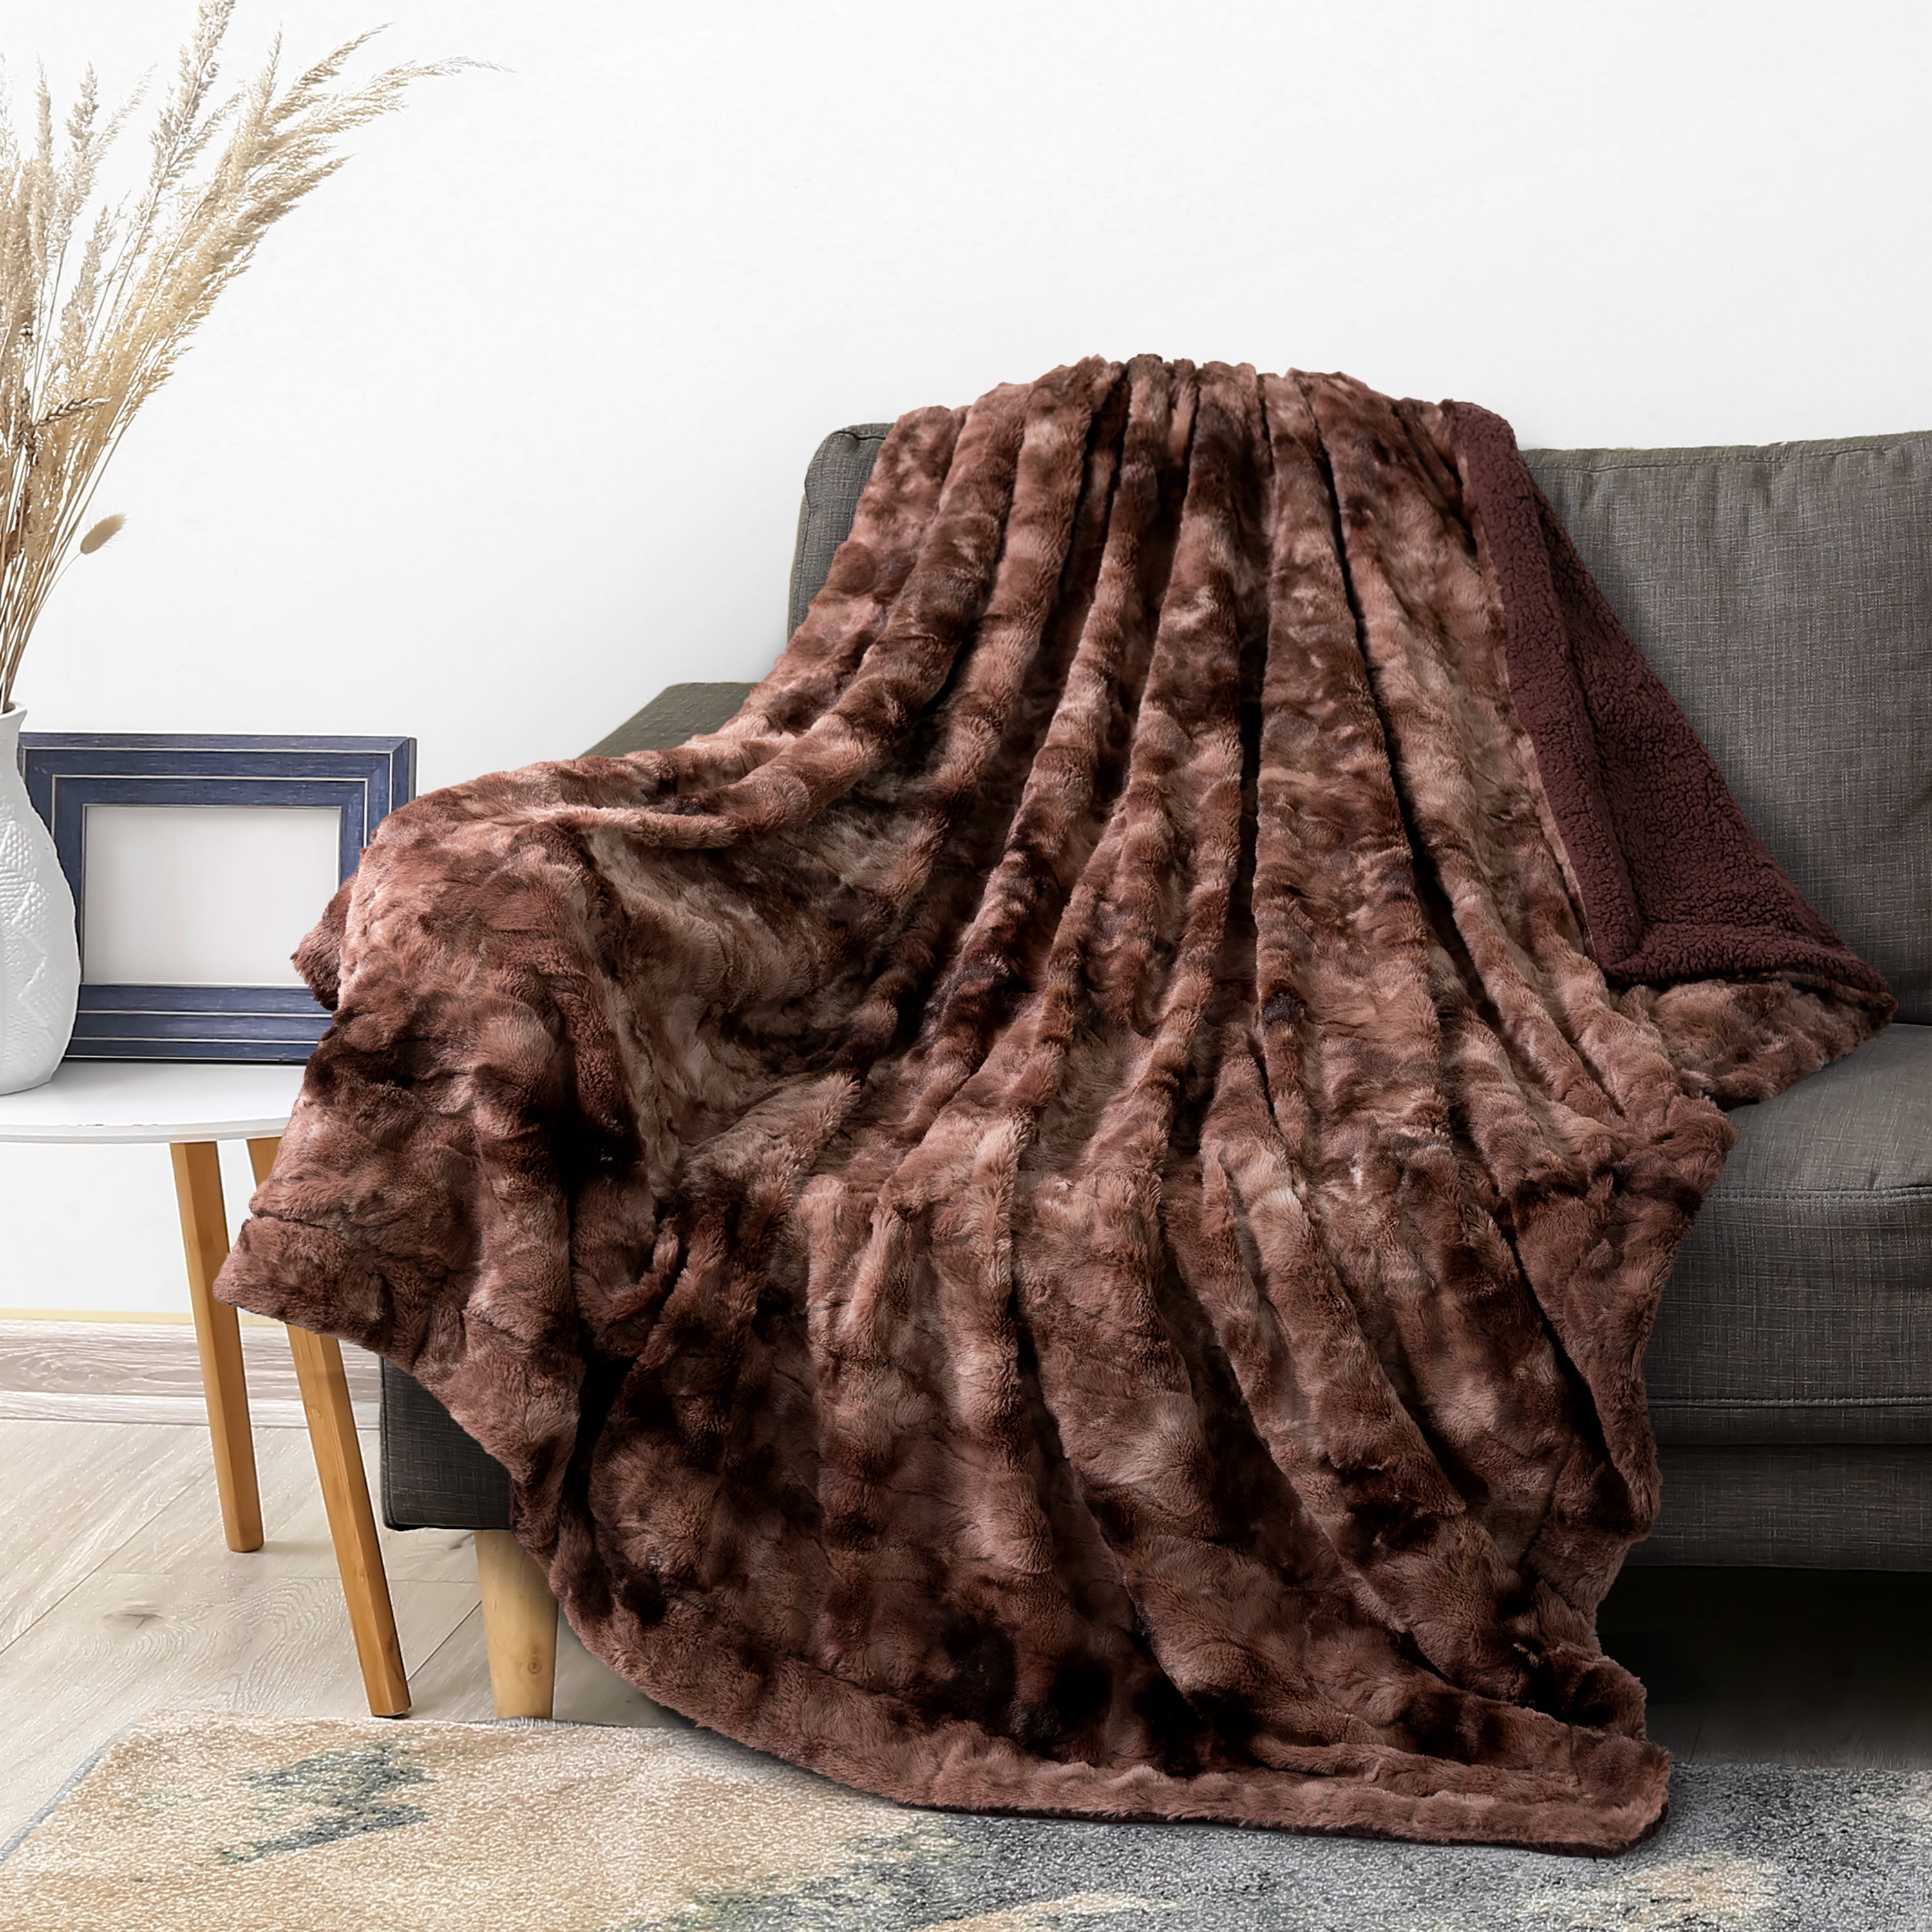 Blanket Double-sided Blankets, Cozy Blankets, Thick Warm Sofa